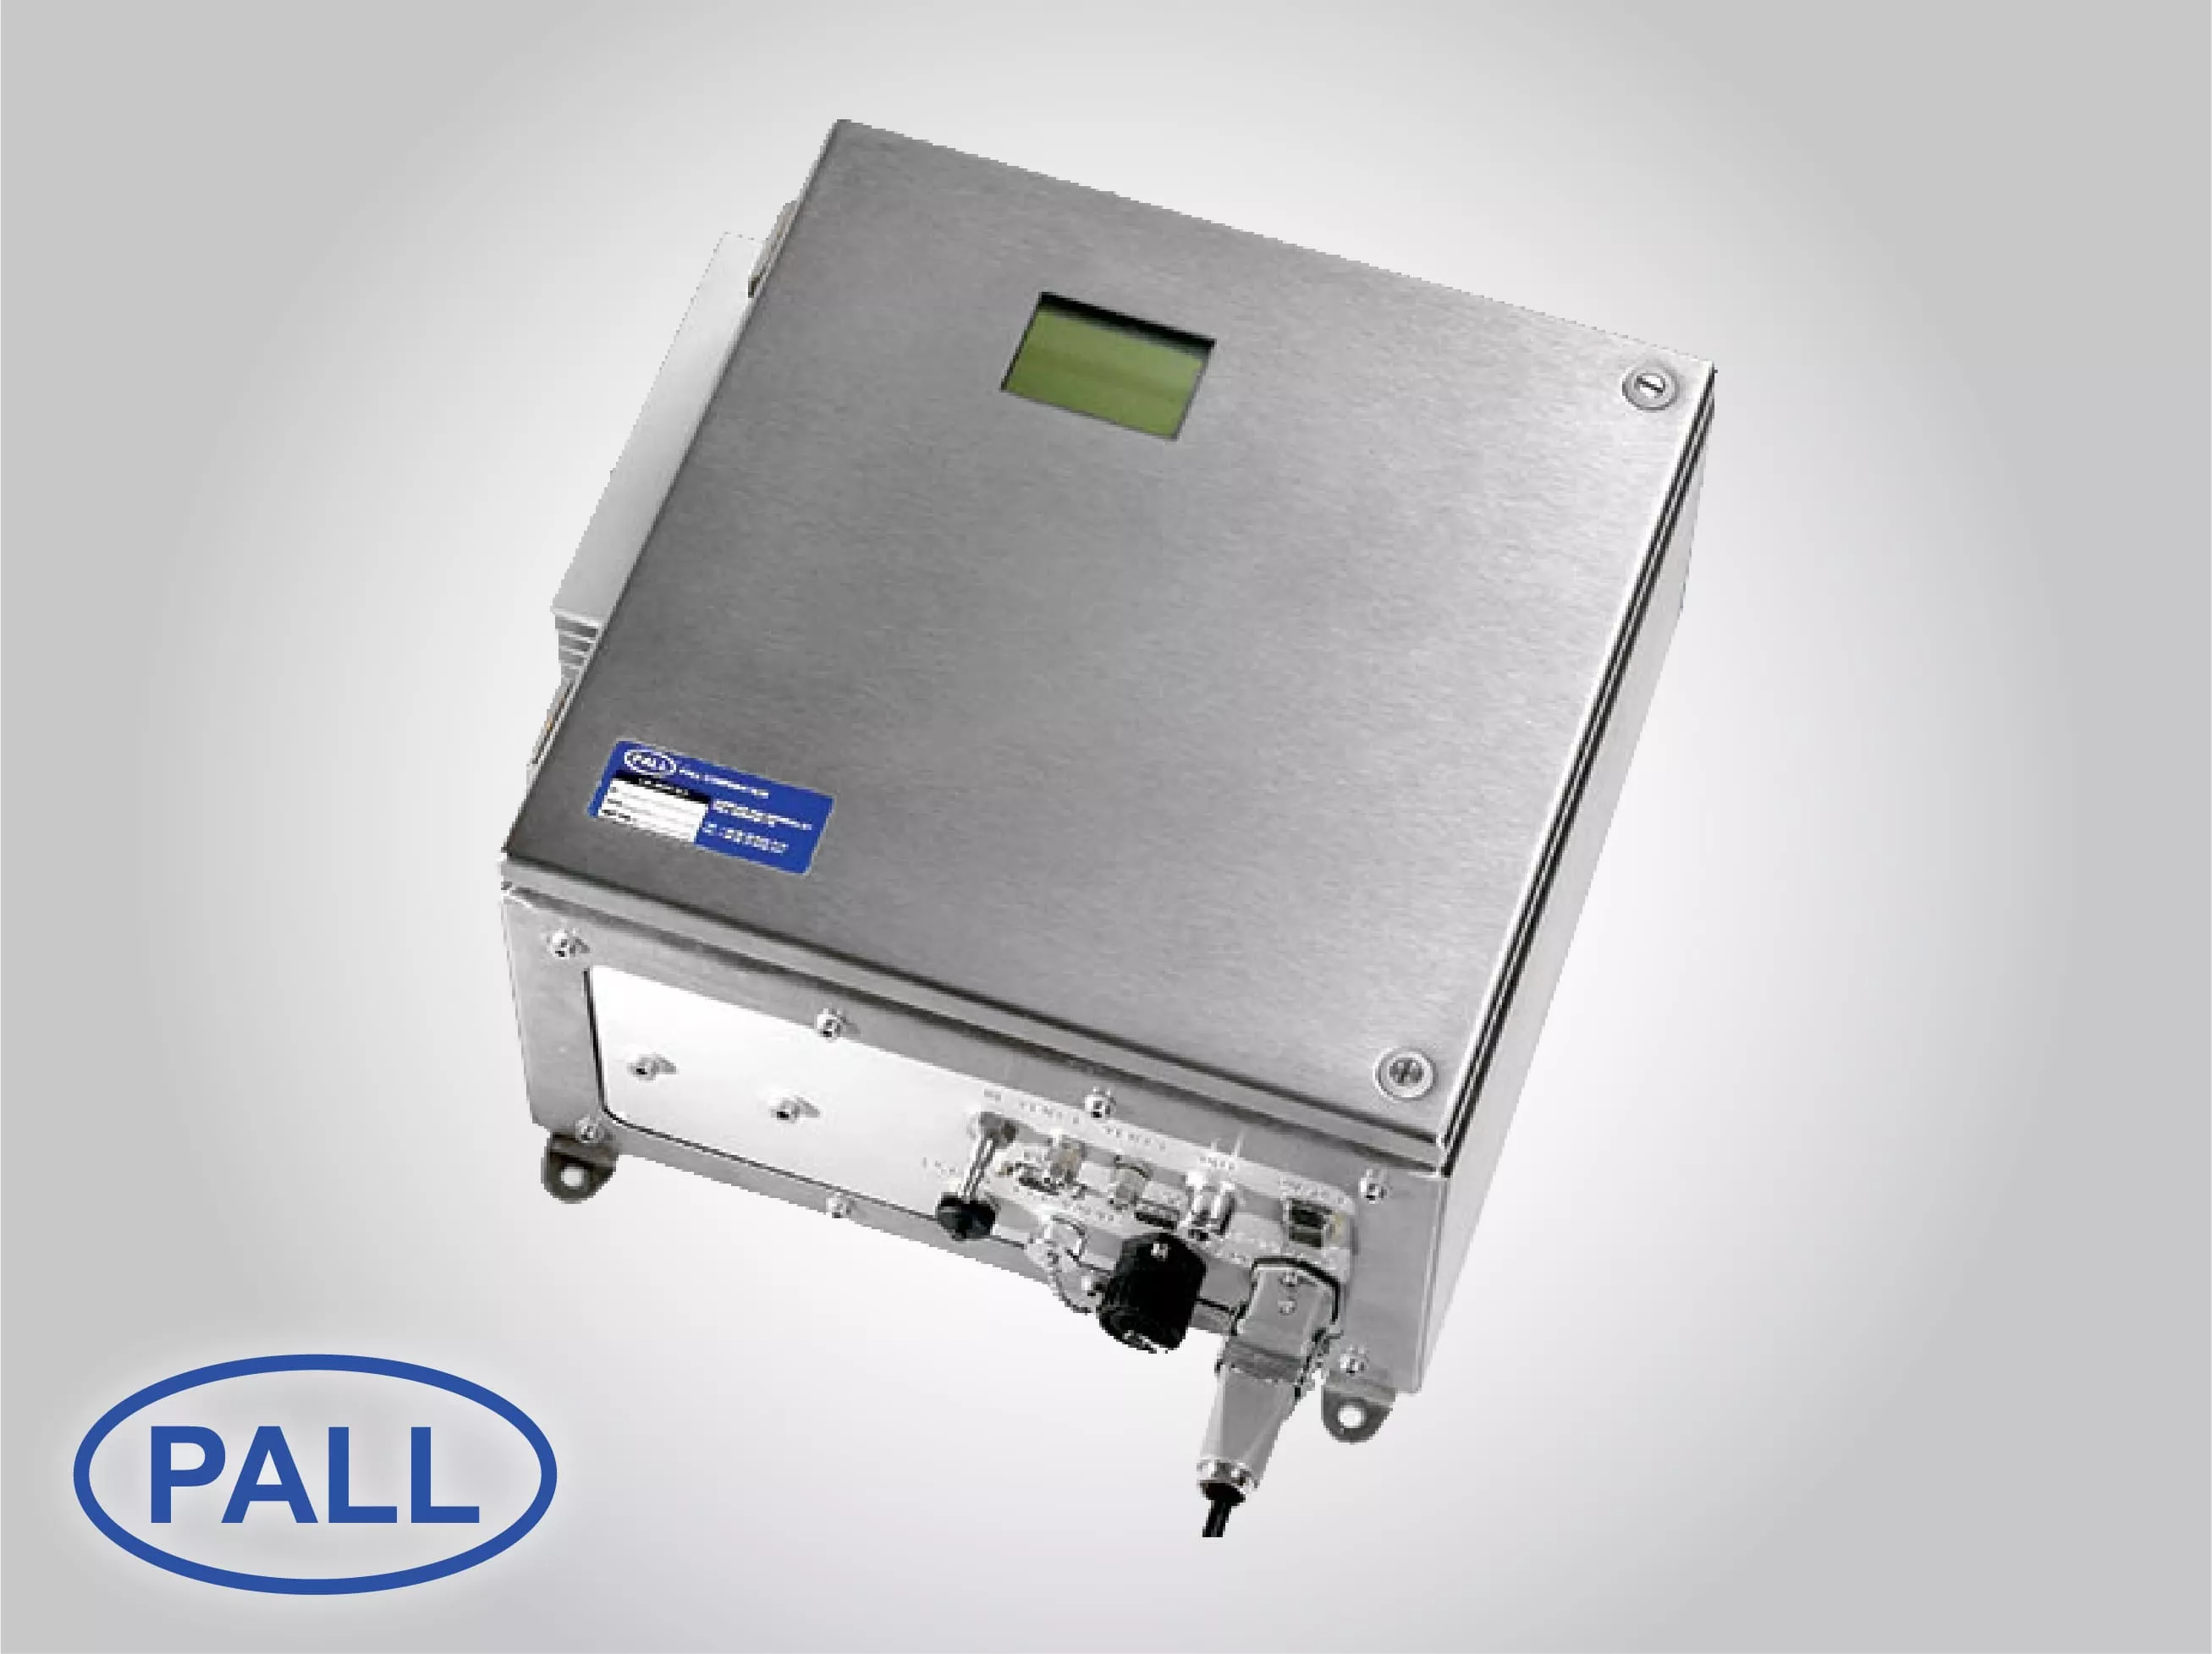 Pall Integrity Testers